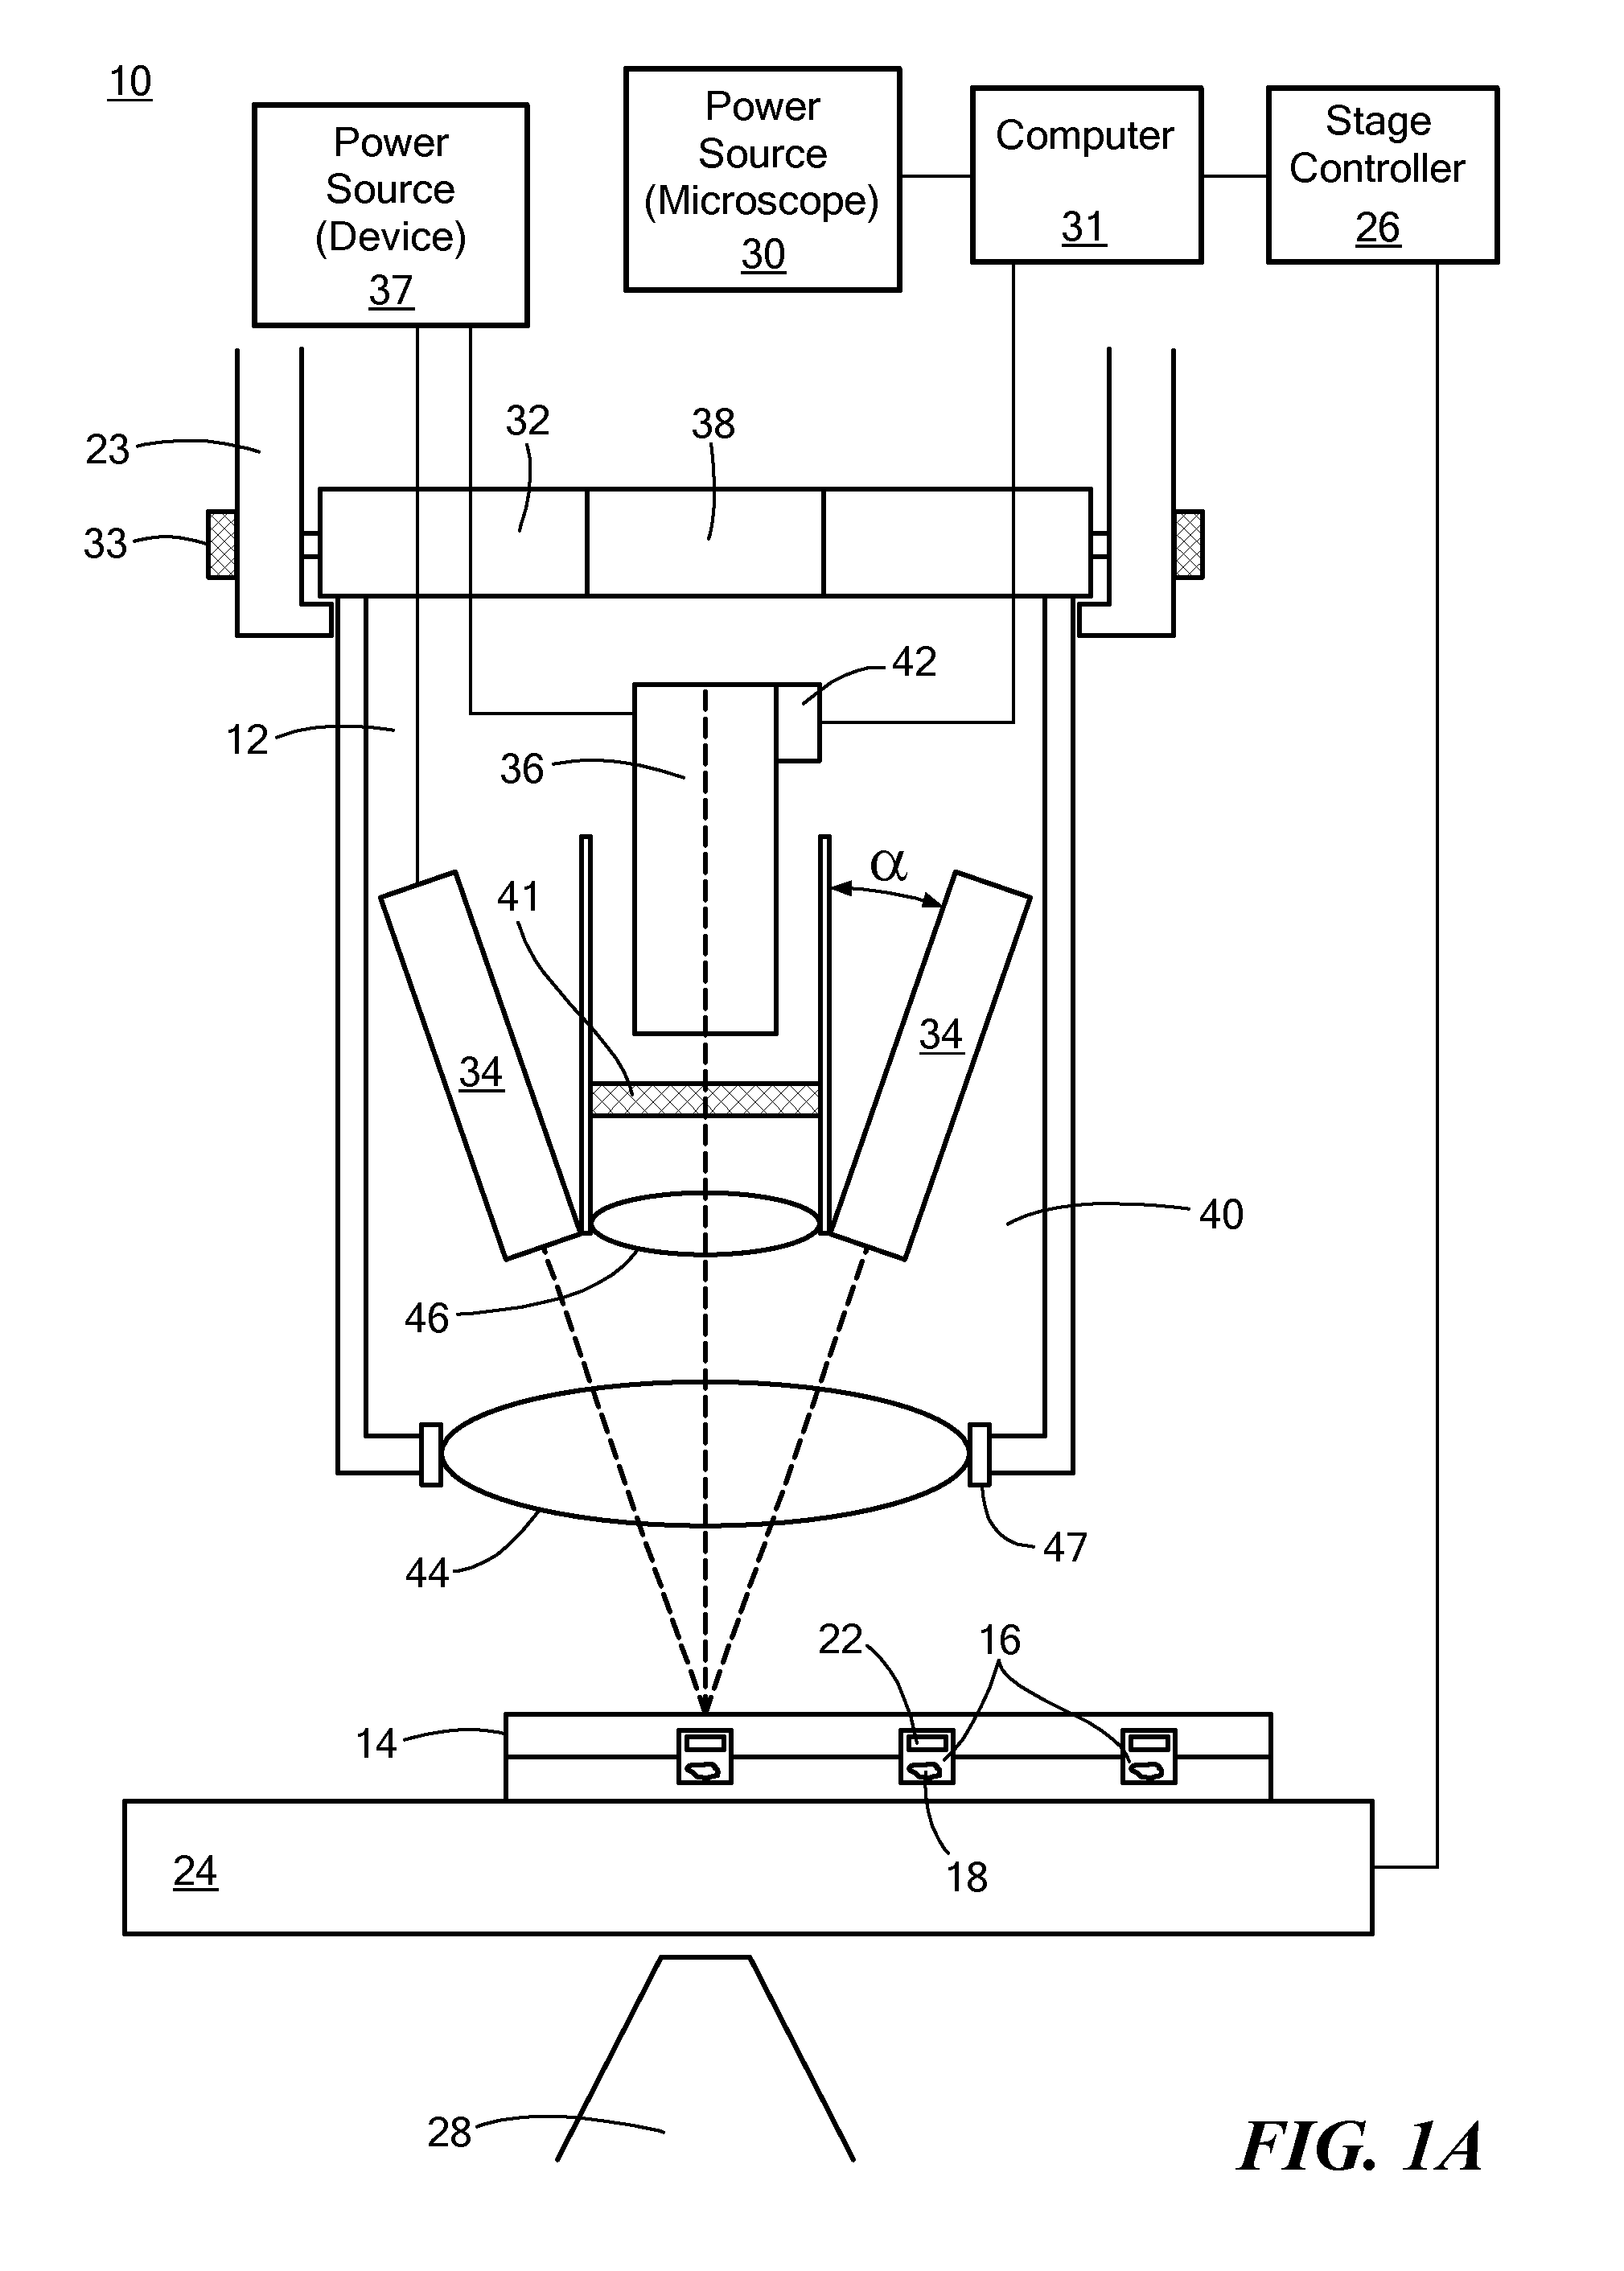 Microscope accessory and microplate apparatus for measuring phosphorescence and cellular oxygen consumption